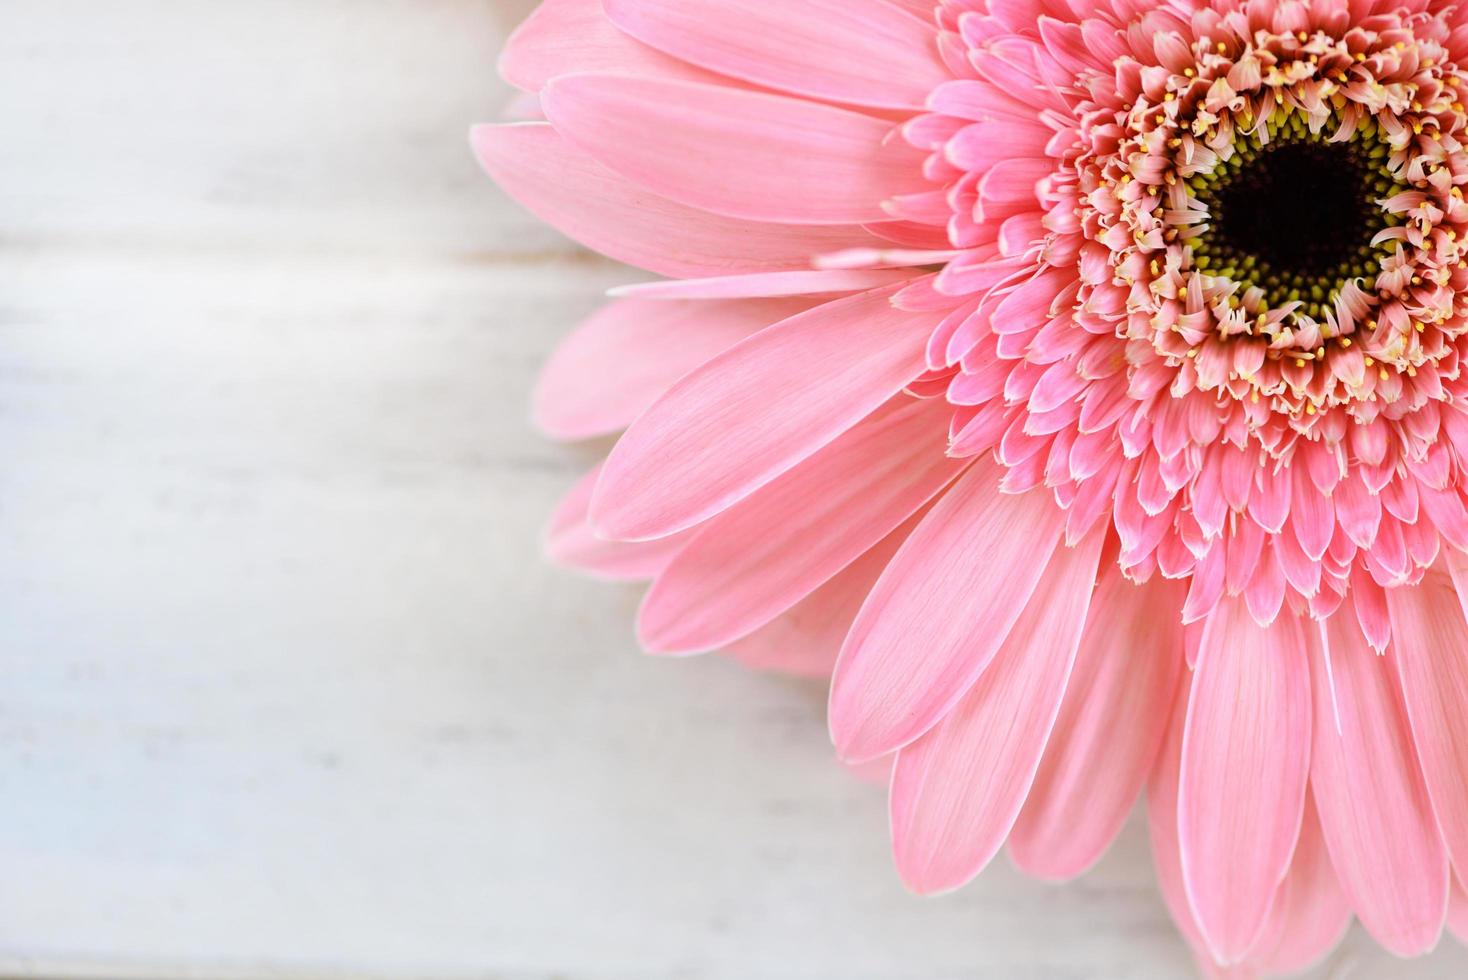 Soft pink flower gerbera daisy on white  table background photo